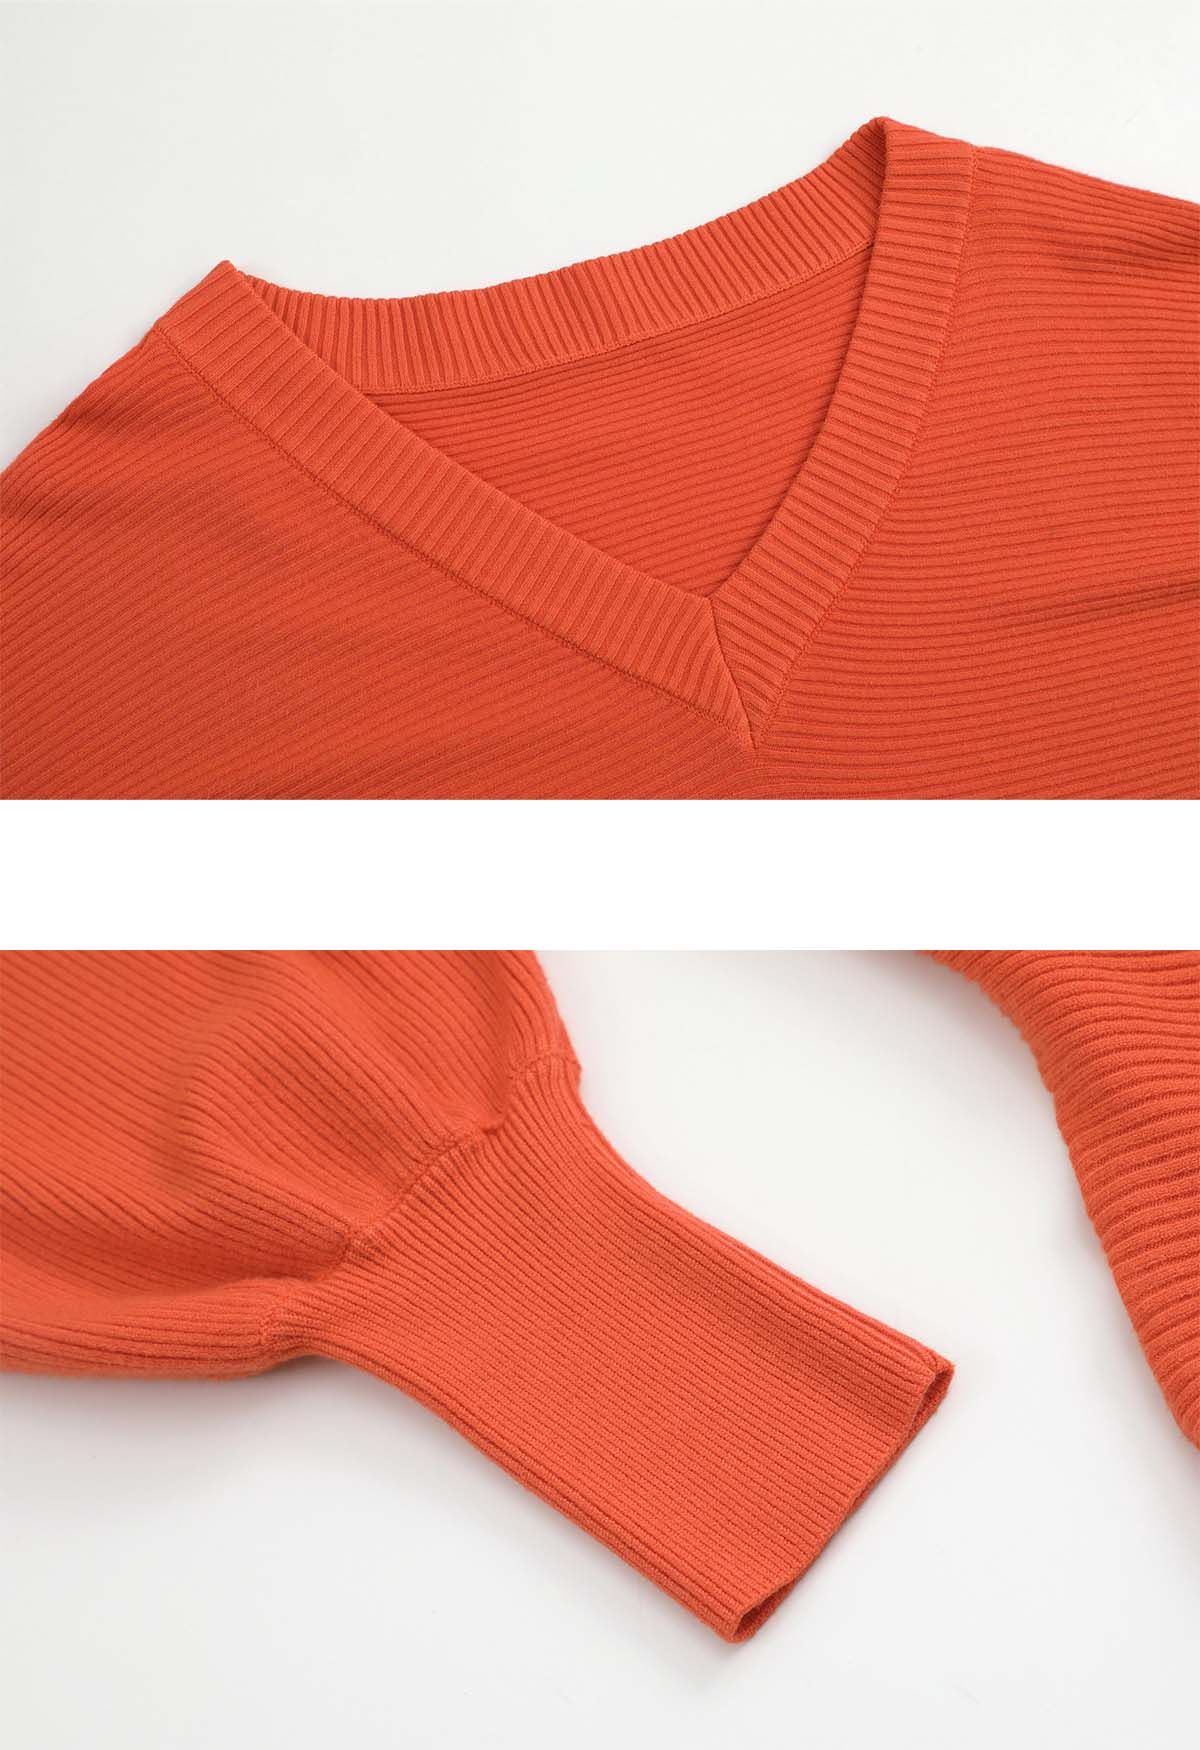 V-Neck Batwing Sleeves Pullover Knit Sweater in Orange